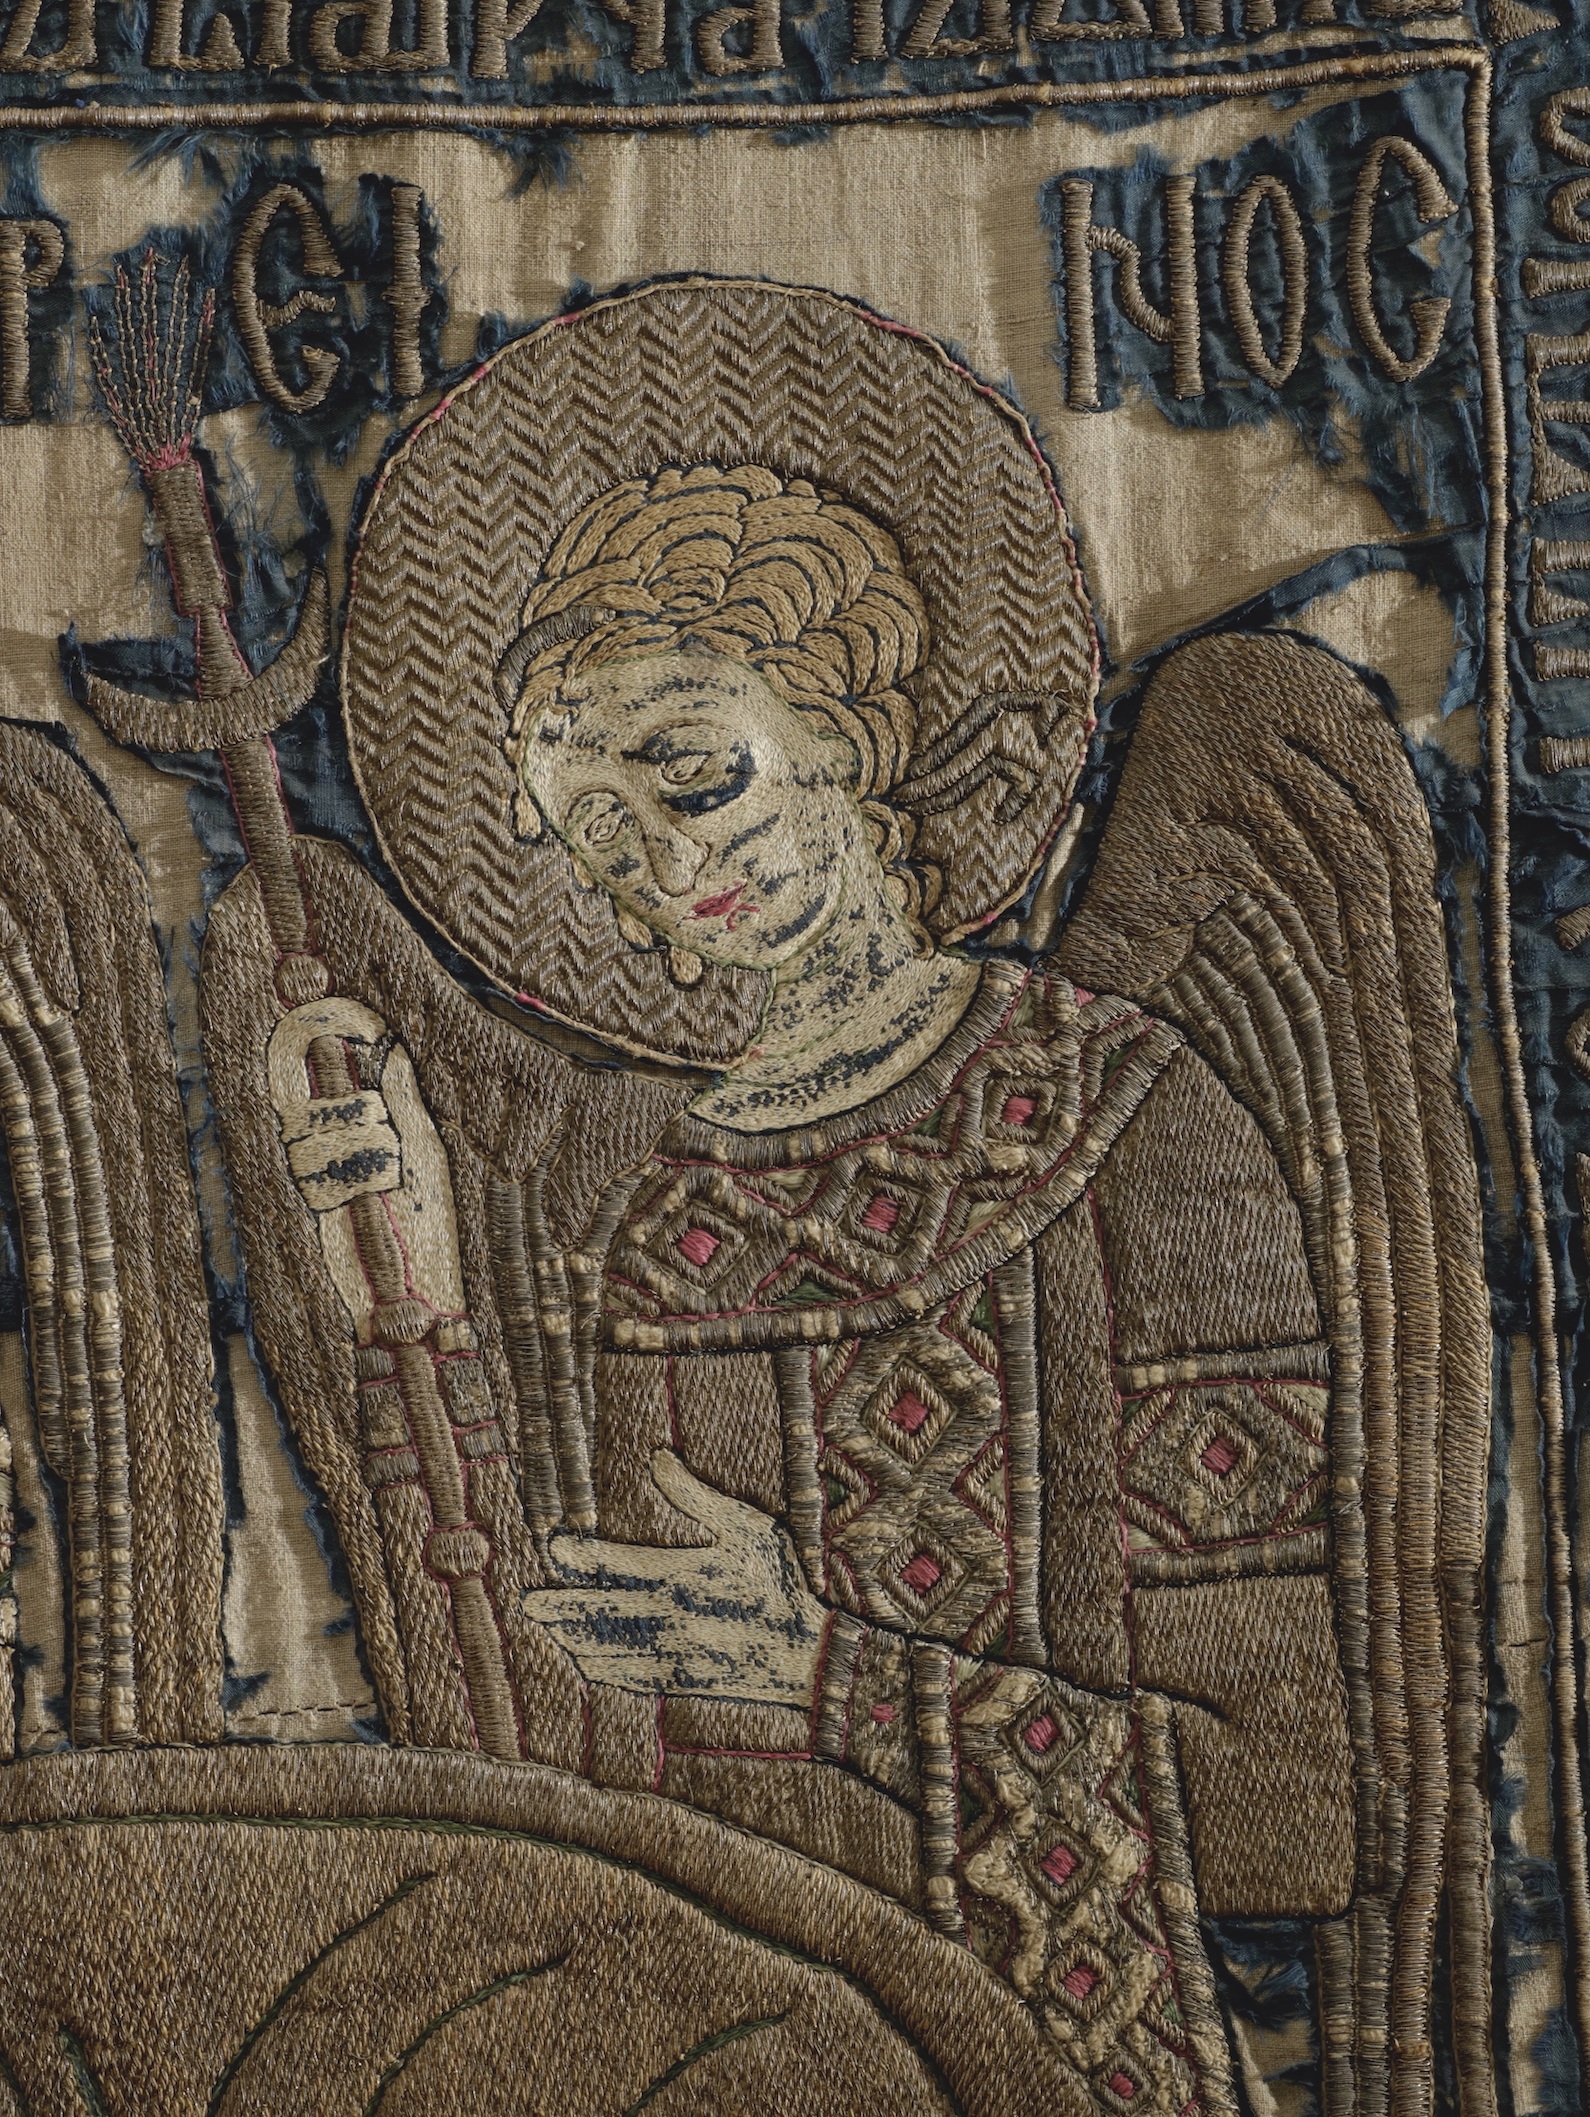 Detail of epitaphios, 1396, embroidery, Cozia Monastery, Romania, now in the National Museum of Art of Romania (MNAR), Bucharest (source: MNAR)